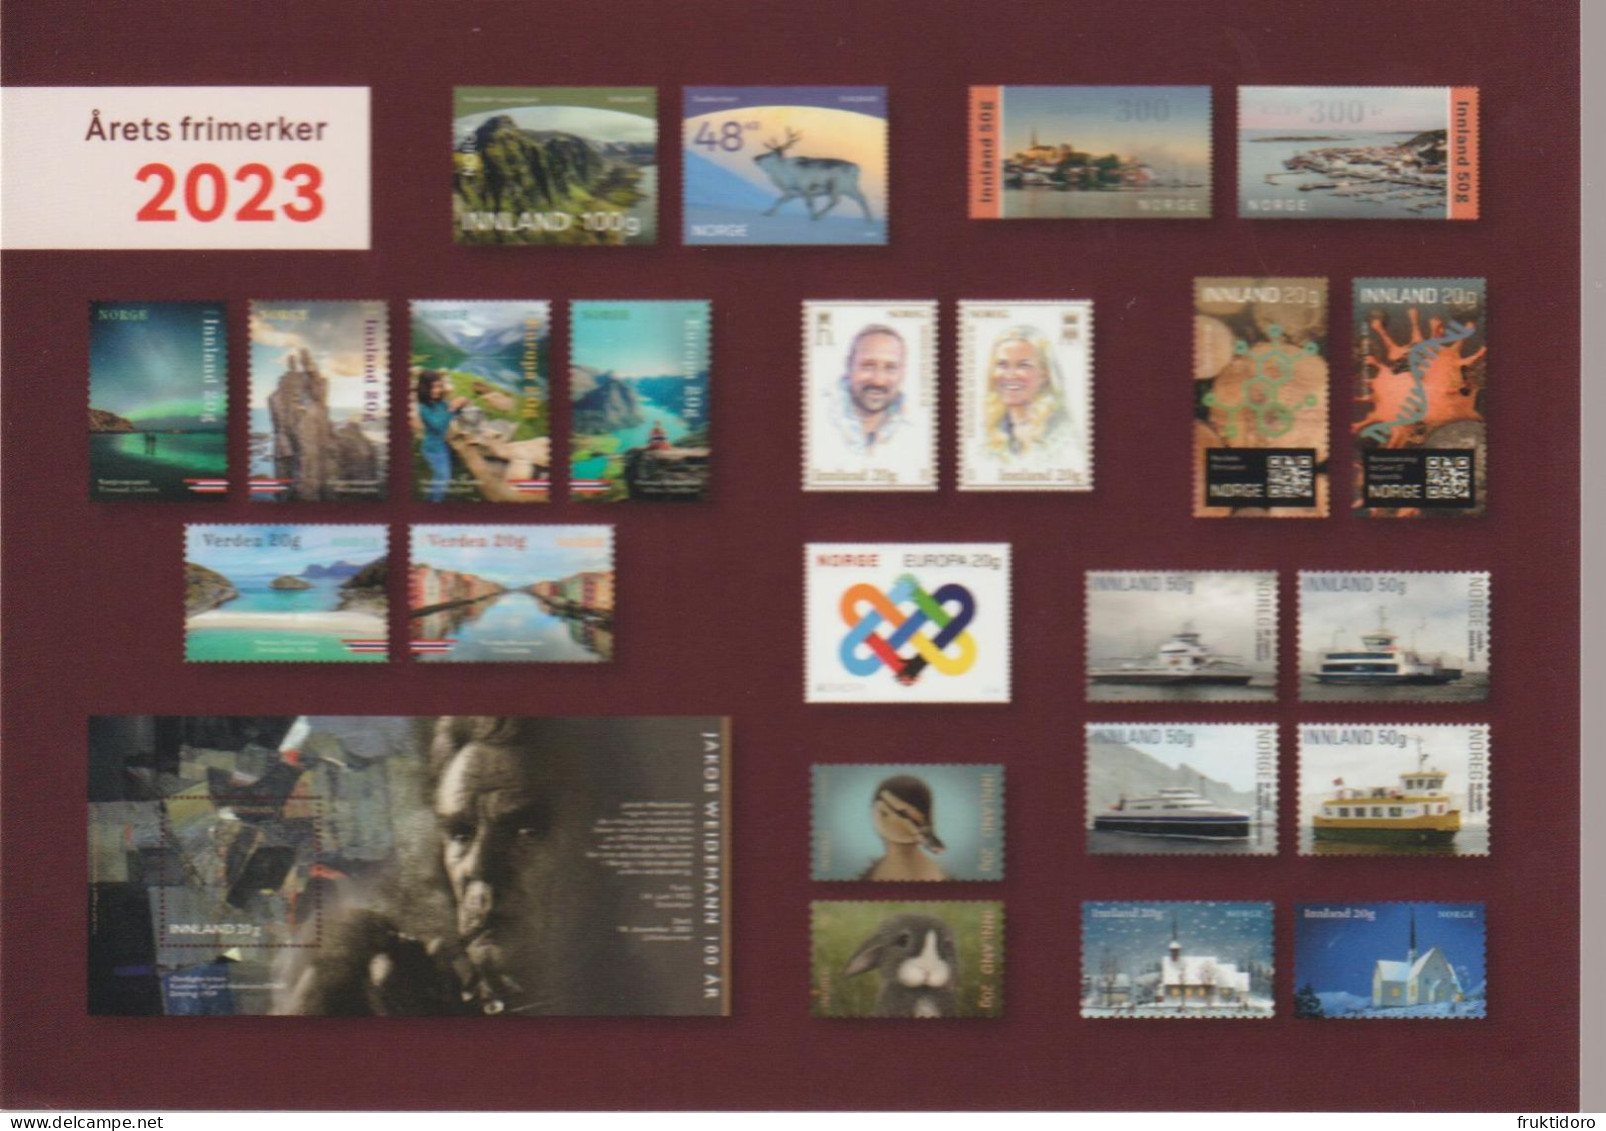 Norway Postcard Depicting All Stamps Issued In 2023 - Errors, Freaks & Oddities (EFO)